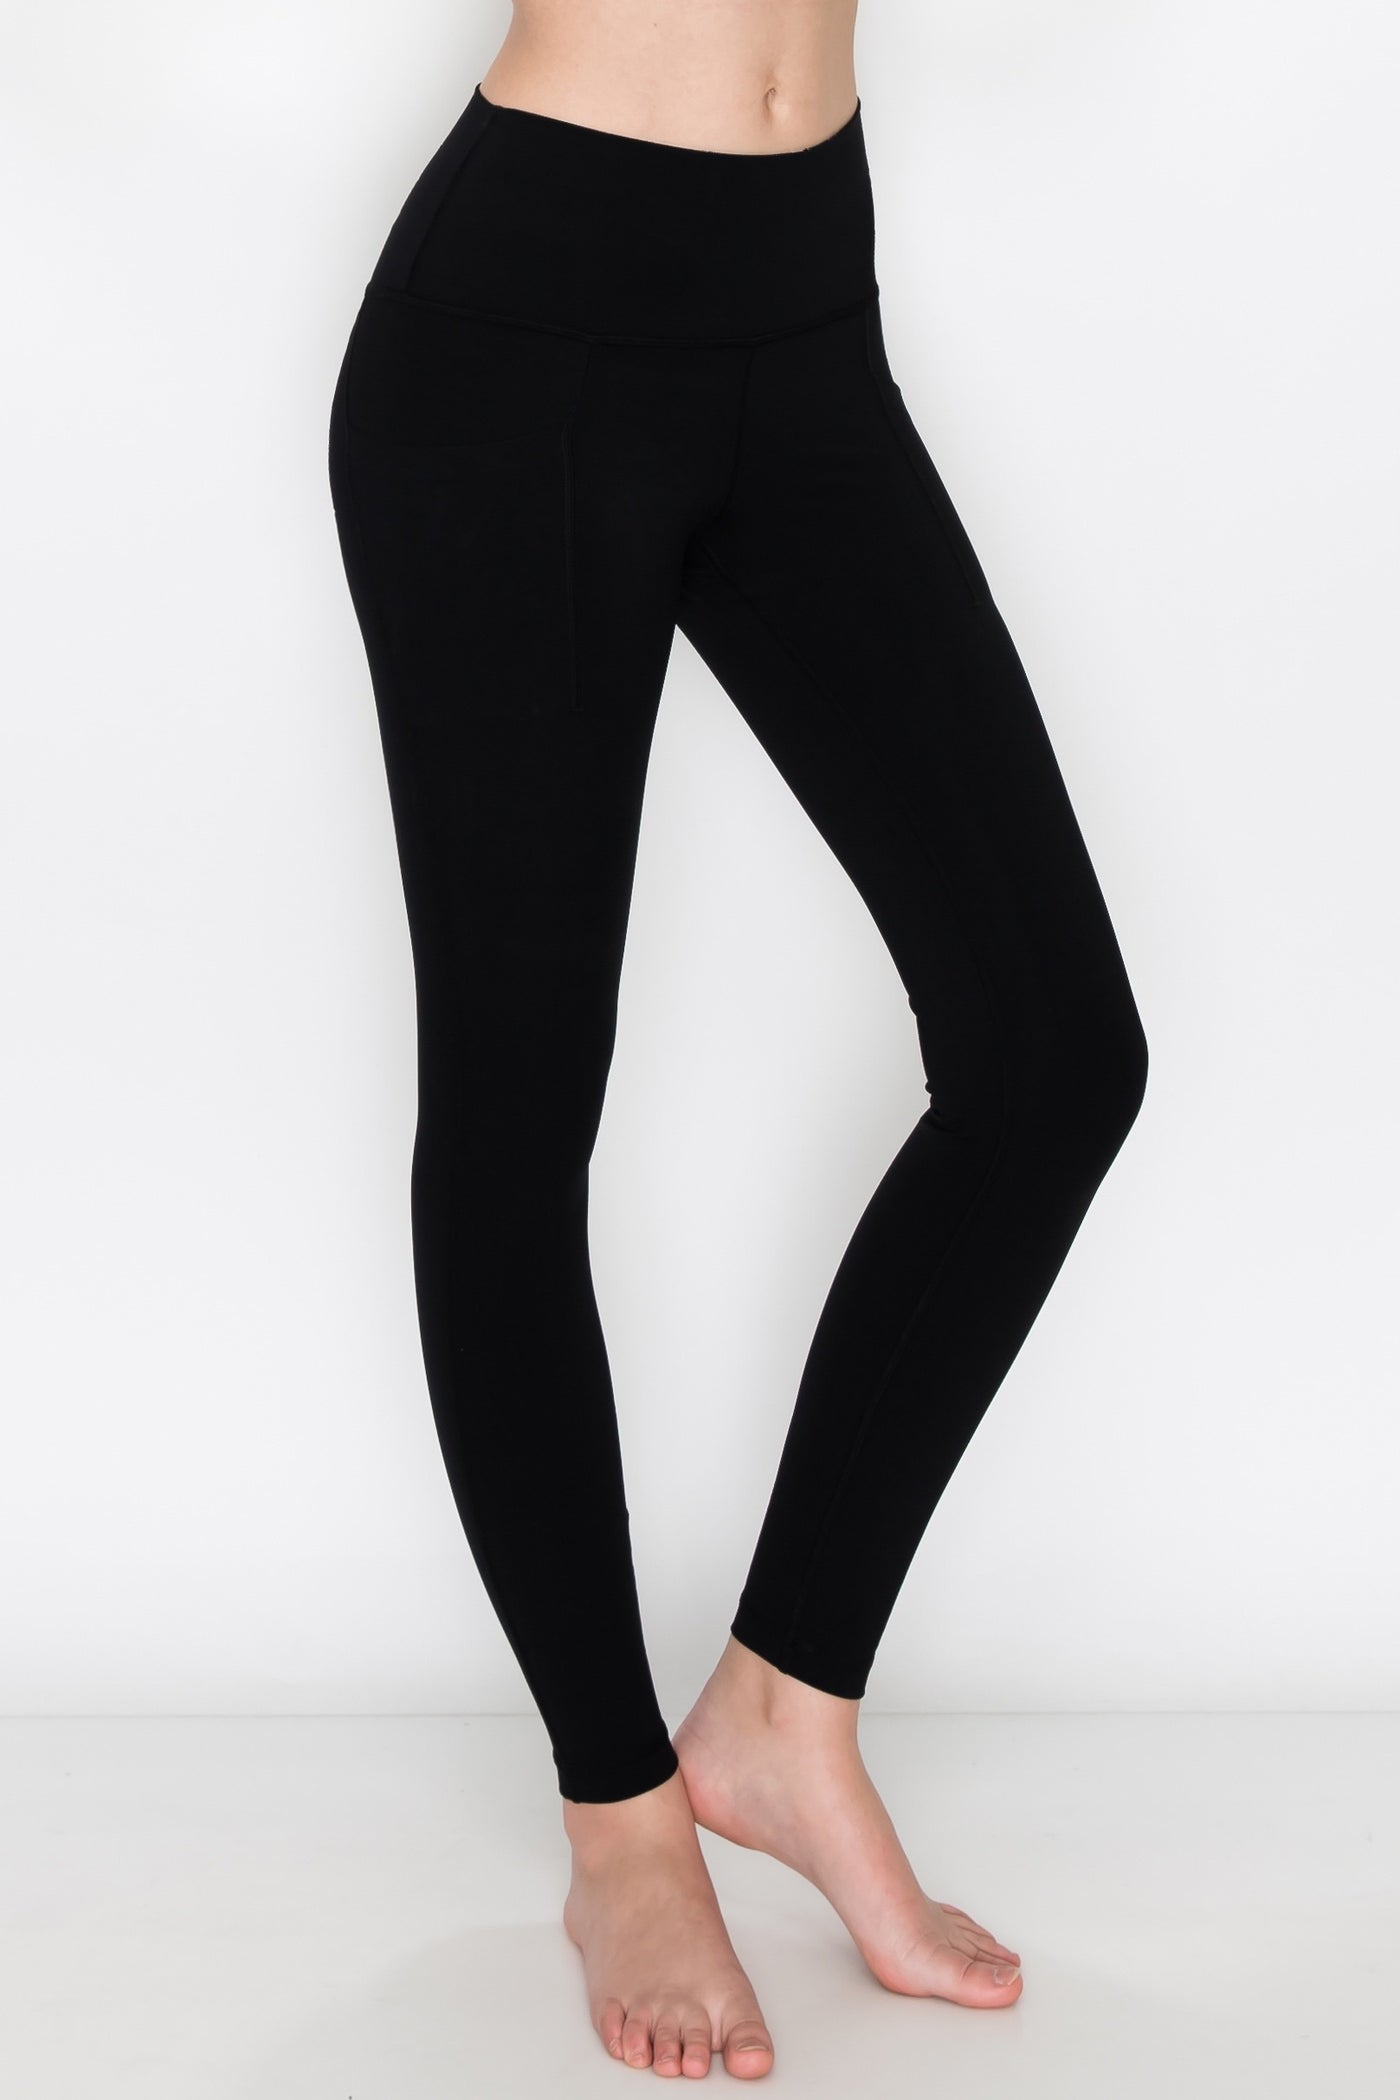 cool touch athletic leggings w/ pockets